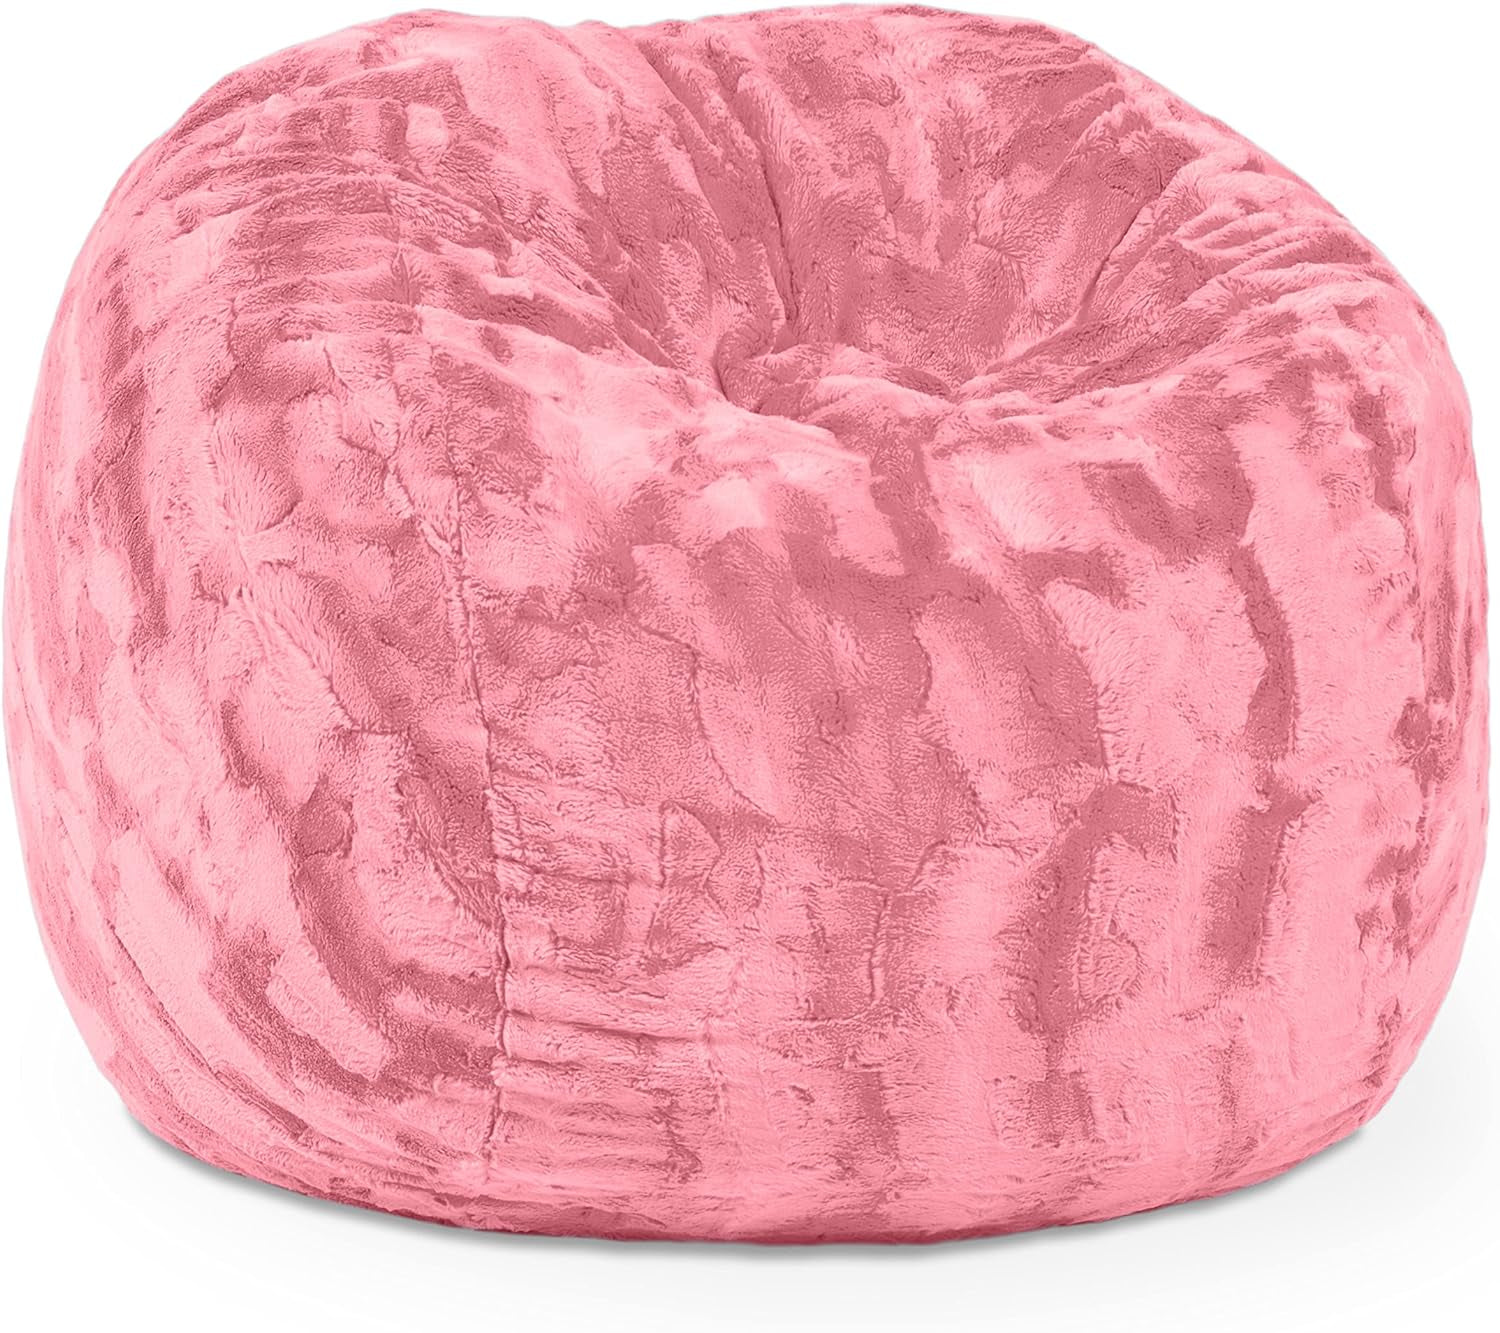 Saxx 3 Foot Bean Bag Chair - Faux Fur - Fun Colors, Unicorn Pink with Removable Cover